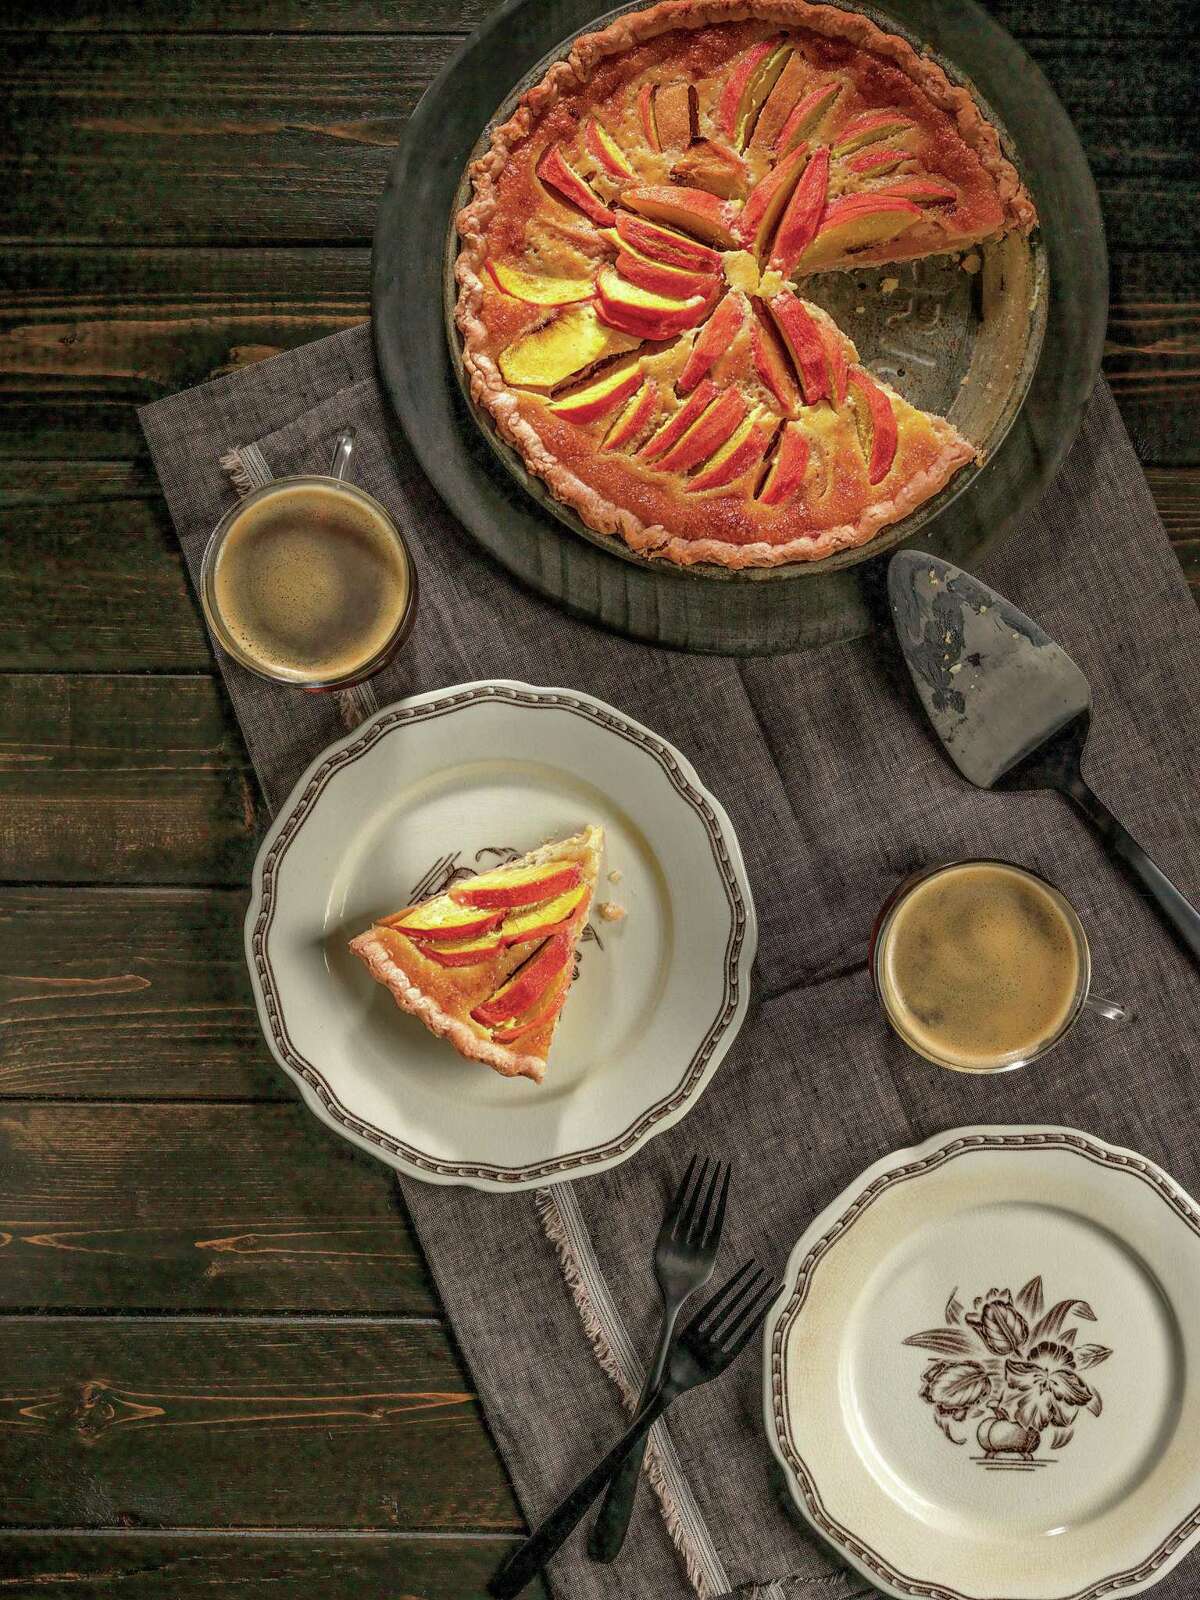 Laura Bush's Peach Cream pie from “Recipes from the President’s Ranch: Food People Like to Eat” by Matthew Wendel.